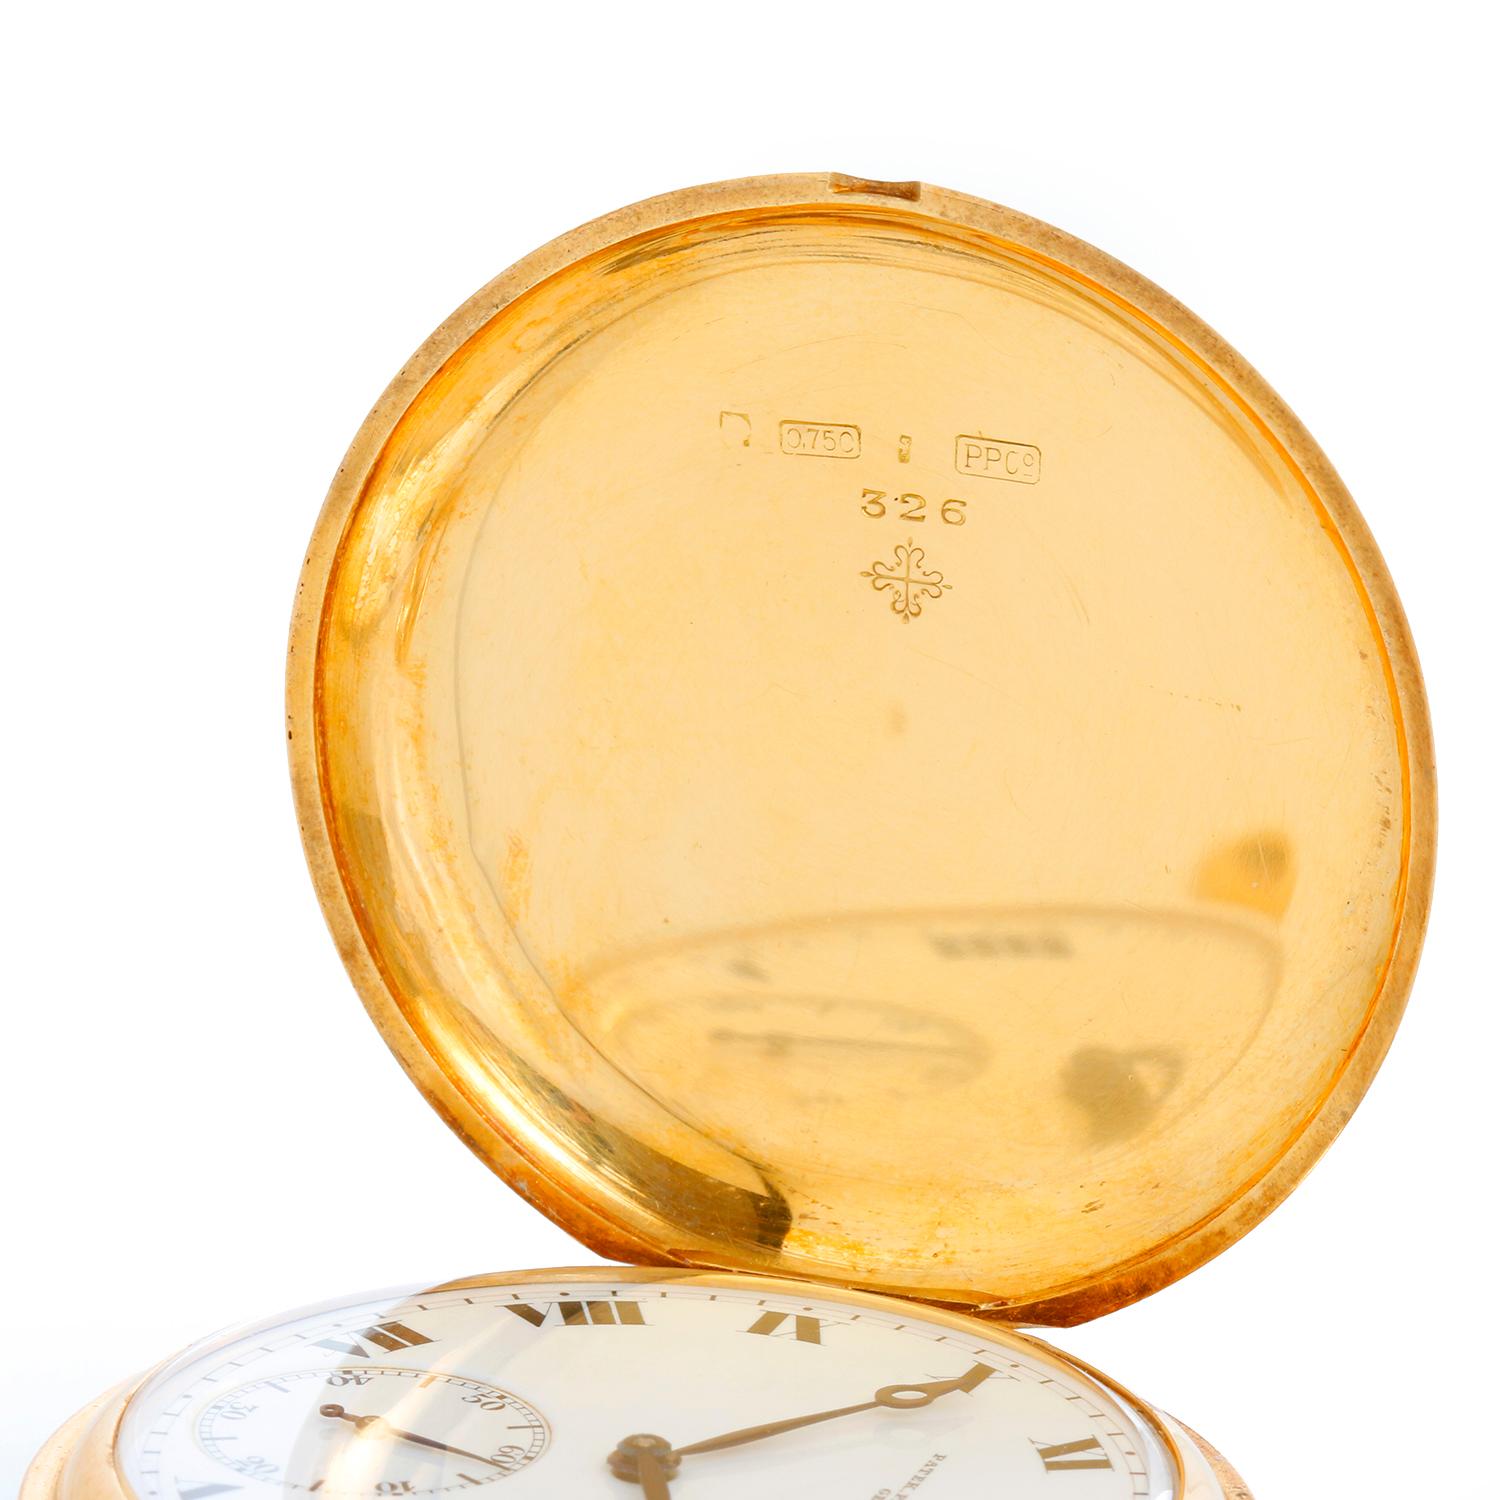 Patek Philippe 18K Hunting Case Roman Numerals Pocket Watch - Manual winding. 18K Yellow Gold case (45 mm). White dial with black Roman numerals sub seconds at 6 o'clock position; blue hands. Case & dial are signed. Pre-owned with custom box.